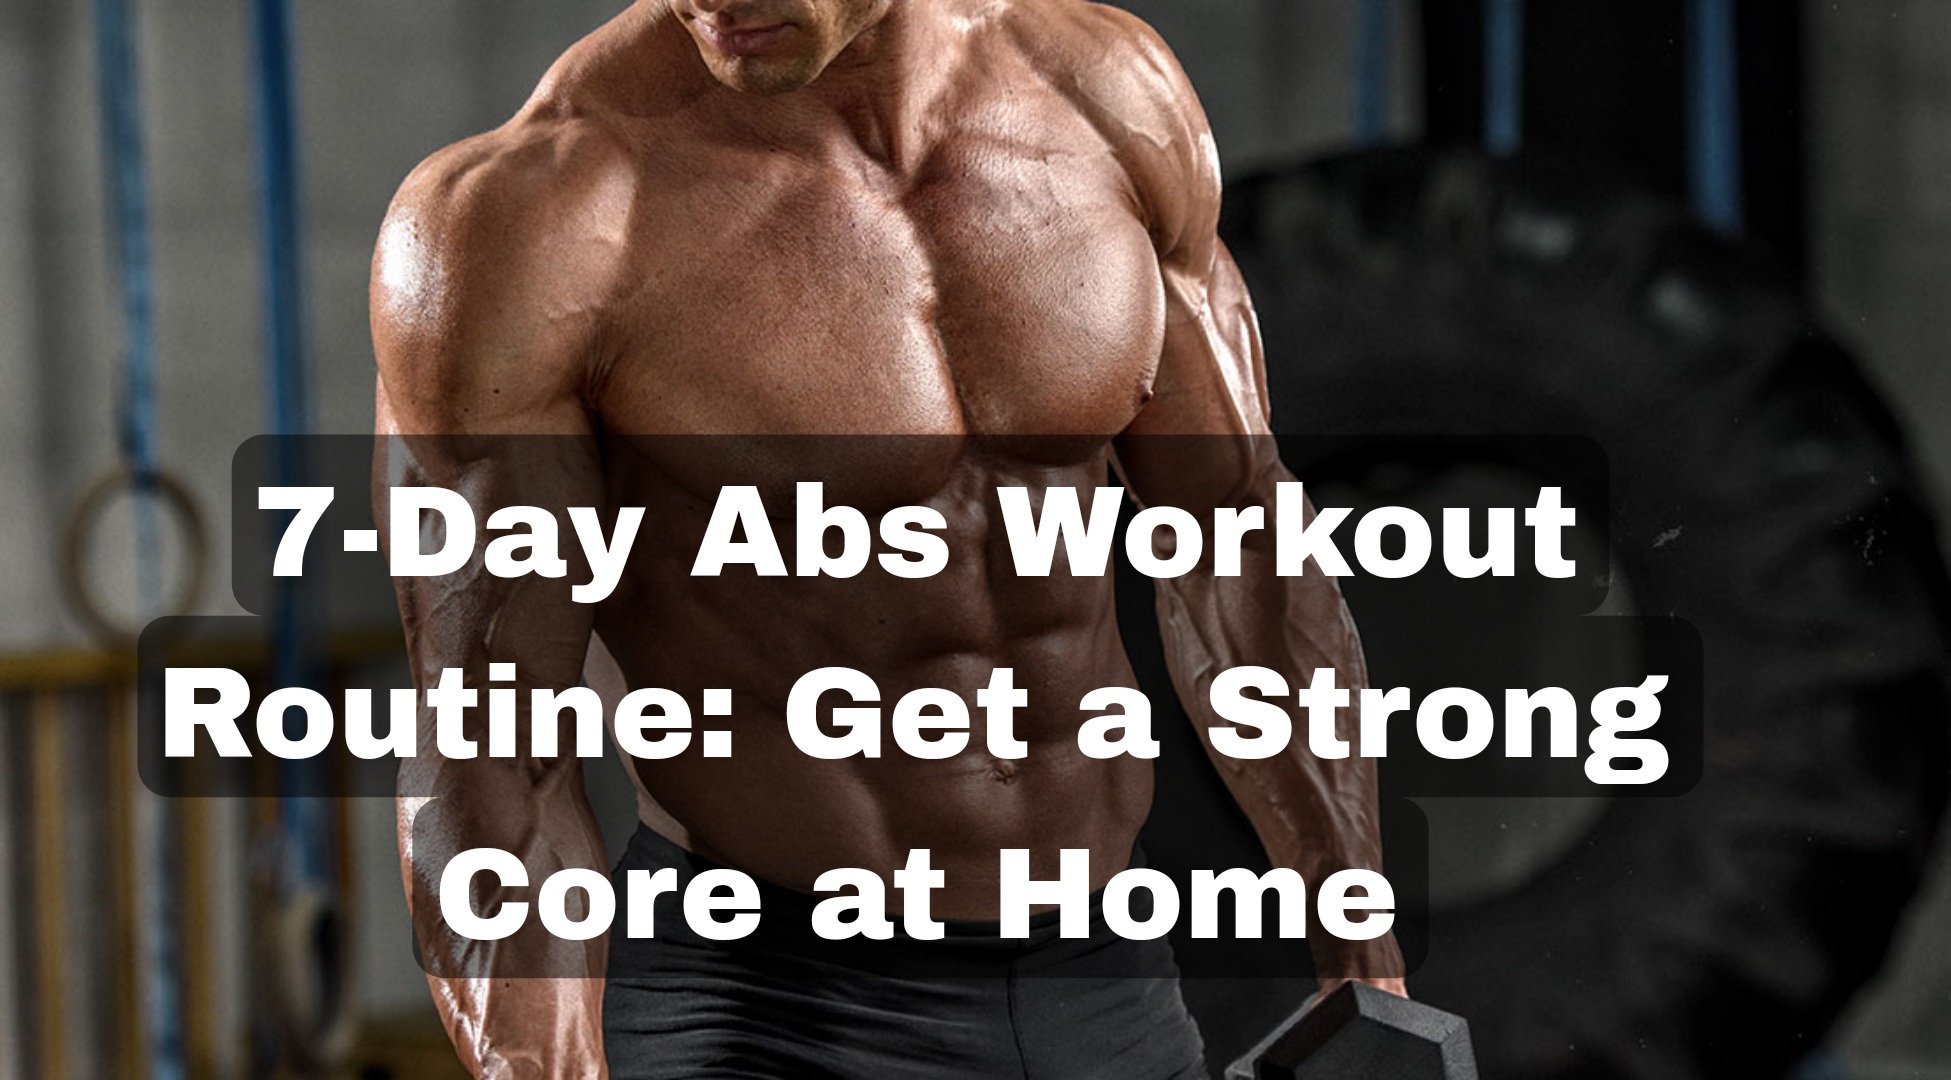 7-Day Abs Workout Routine: Get a Strong Core at Home